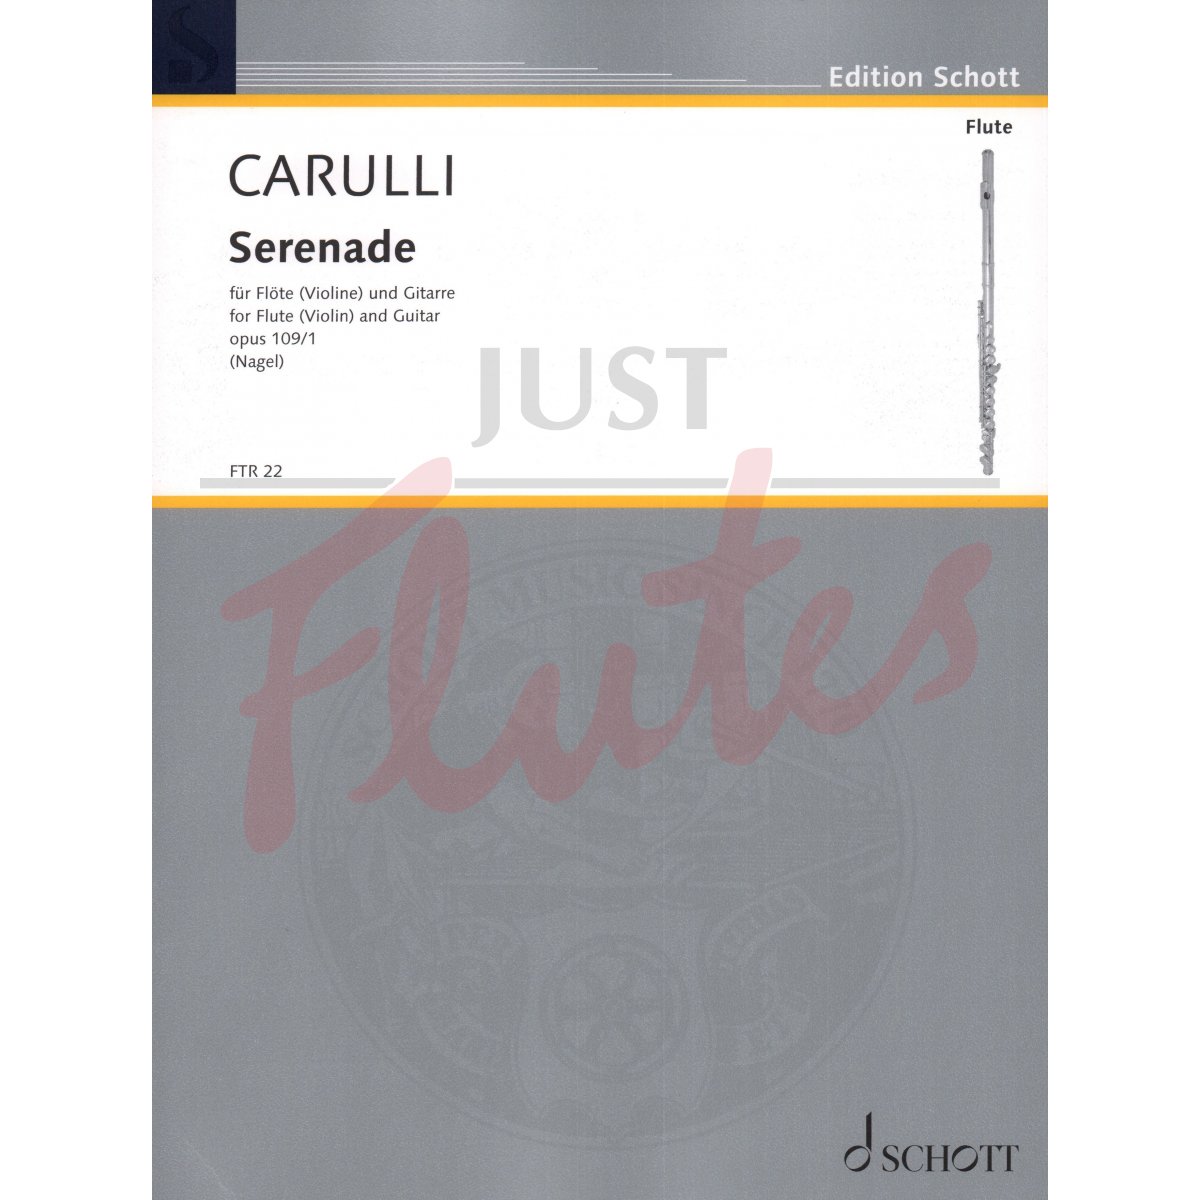 Serenade for Flute and Guitar